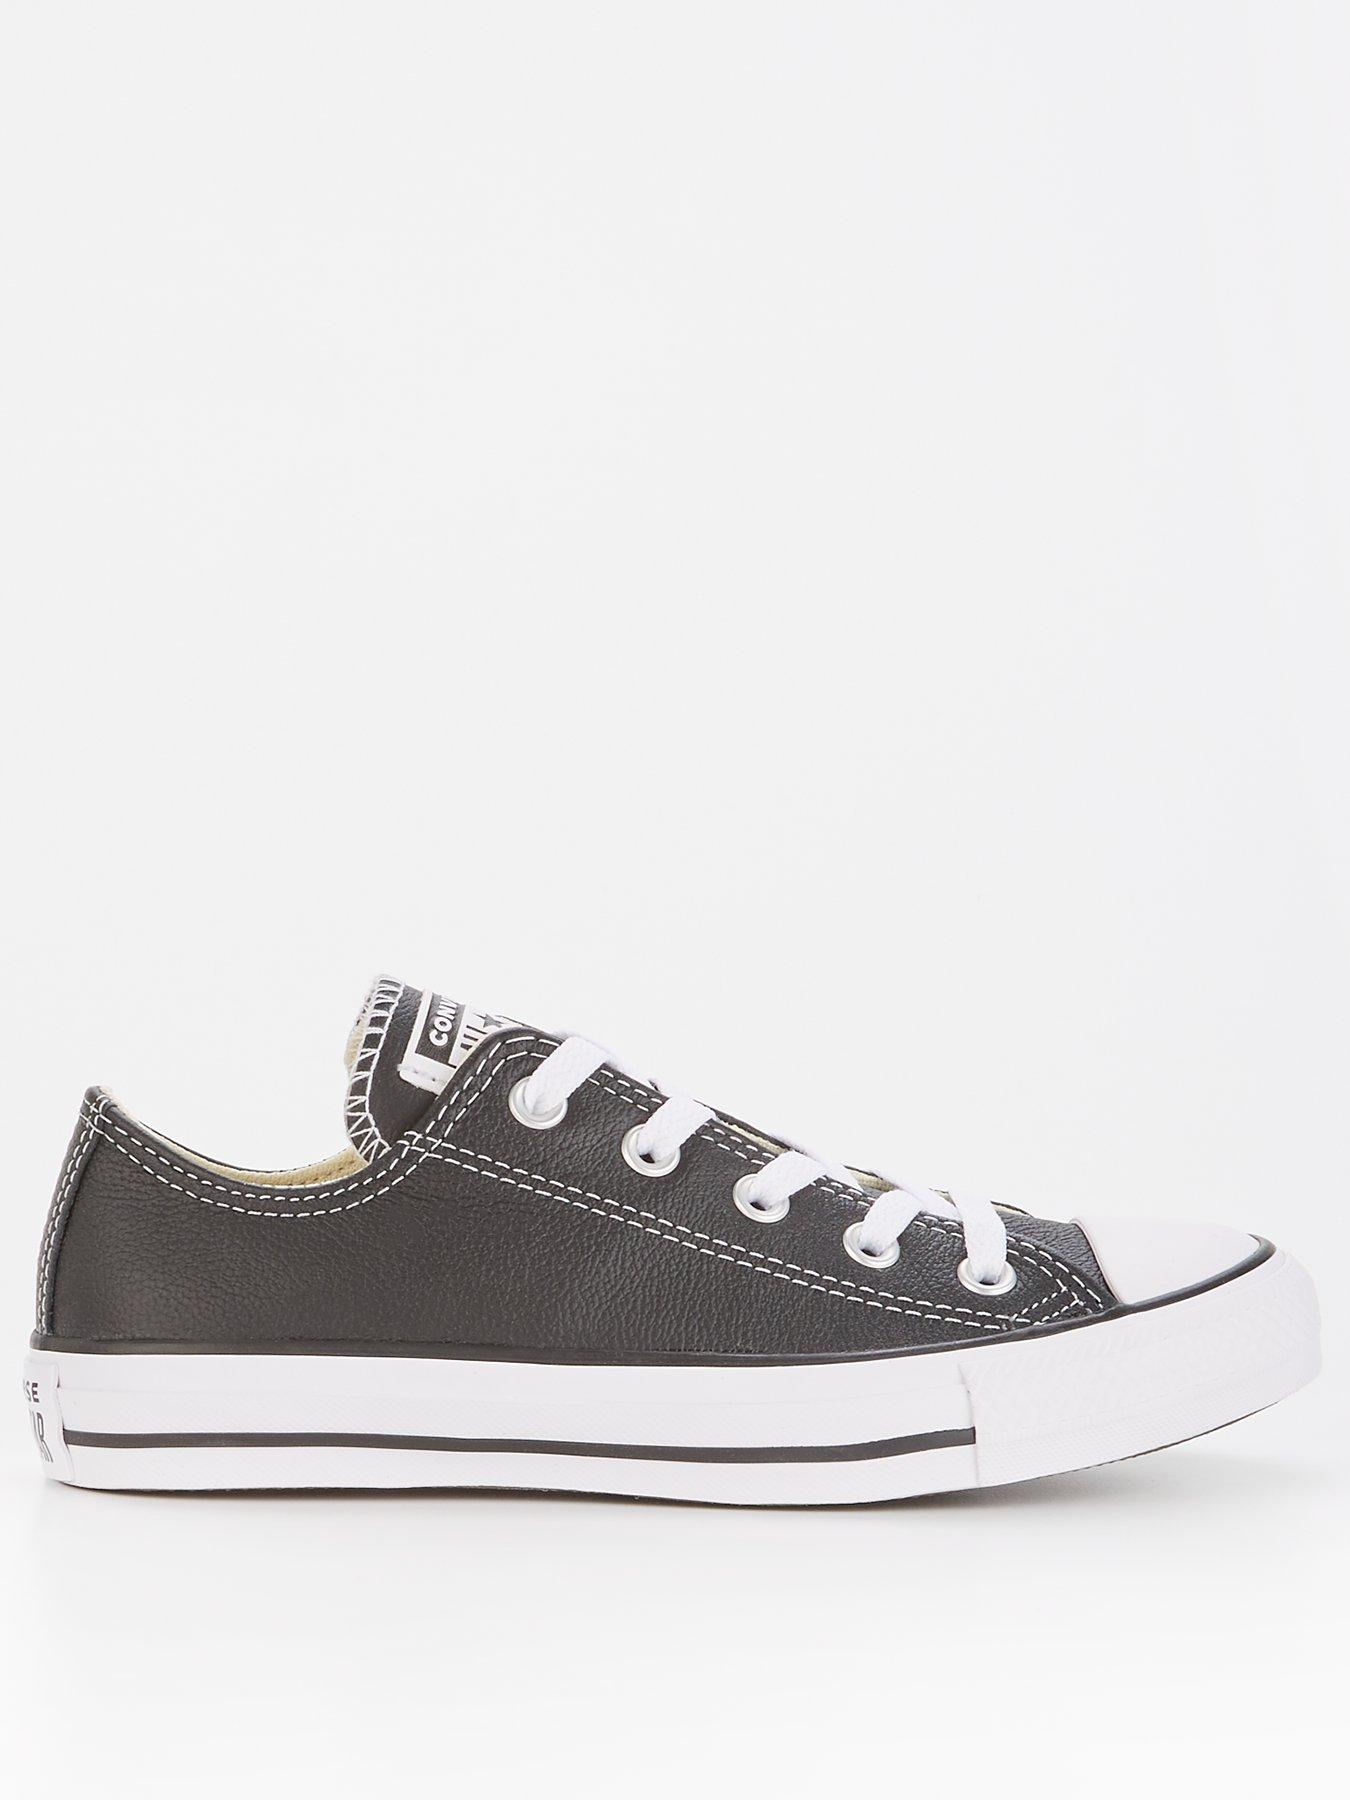 Converse Chuck Taylor All Star Leather Ox Black white | littlewoods.com